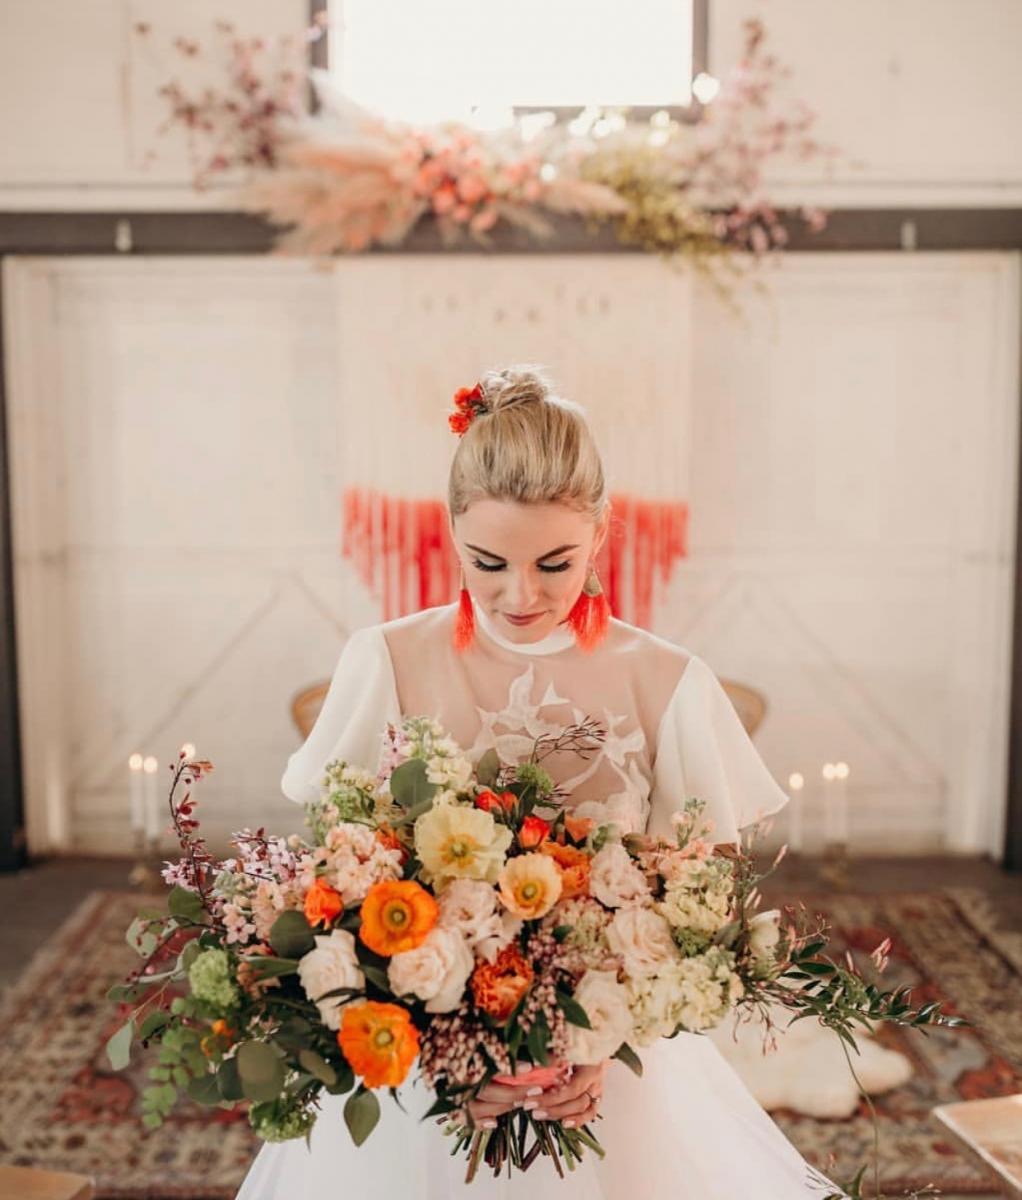 Photo by Carley Jayne, Florals by Colibri Blooms